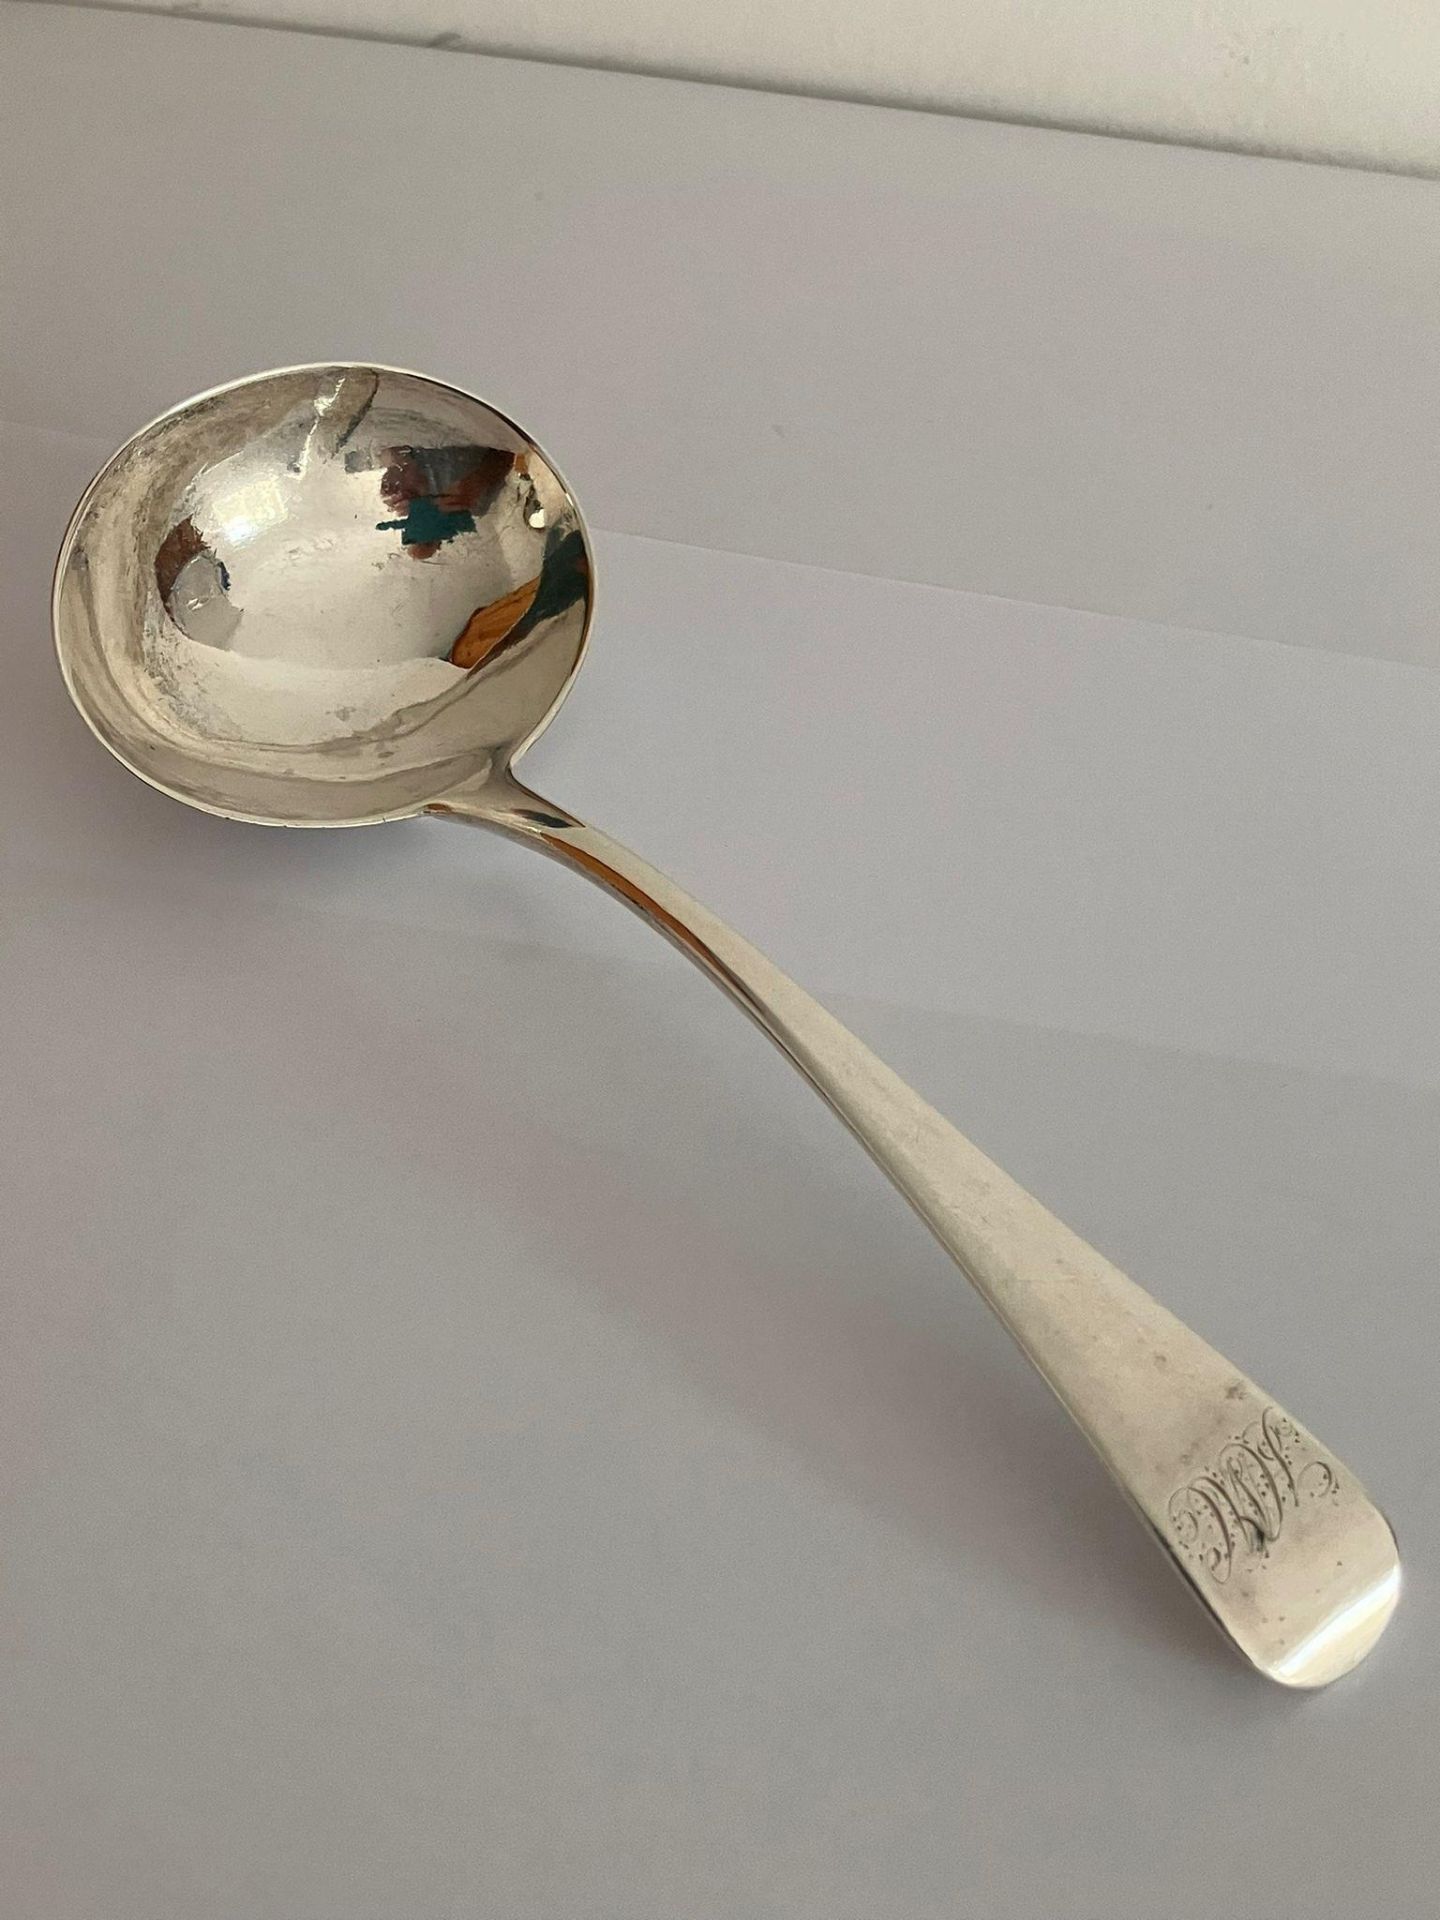 Antique GEORGE III SILVER LADLE. Clear hallmark for George Smith, London 1806. Exceptional